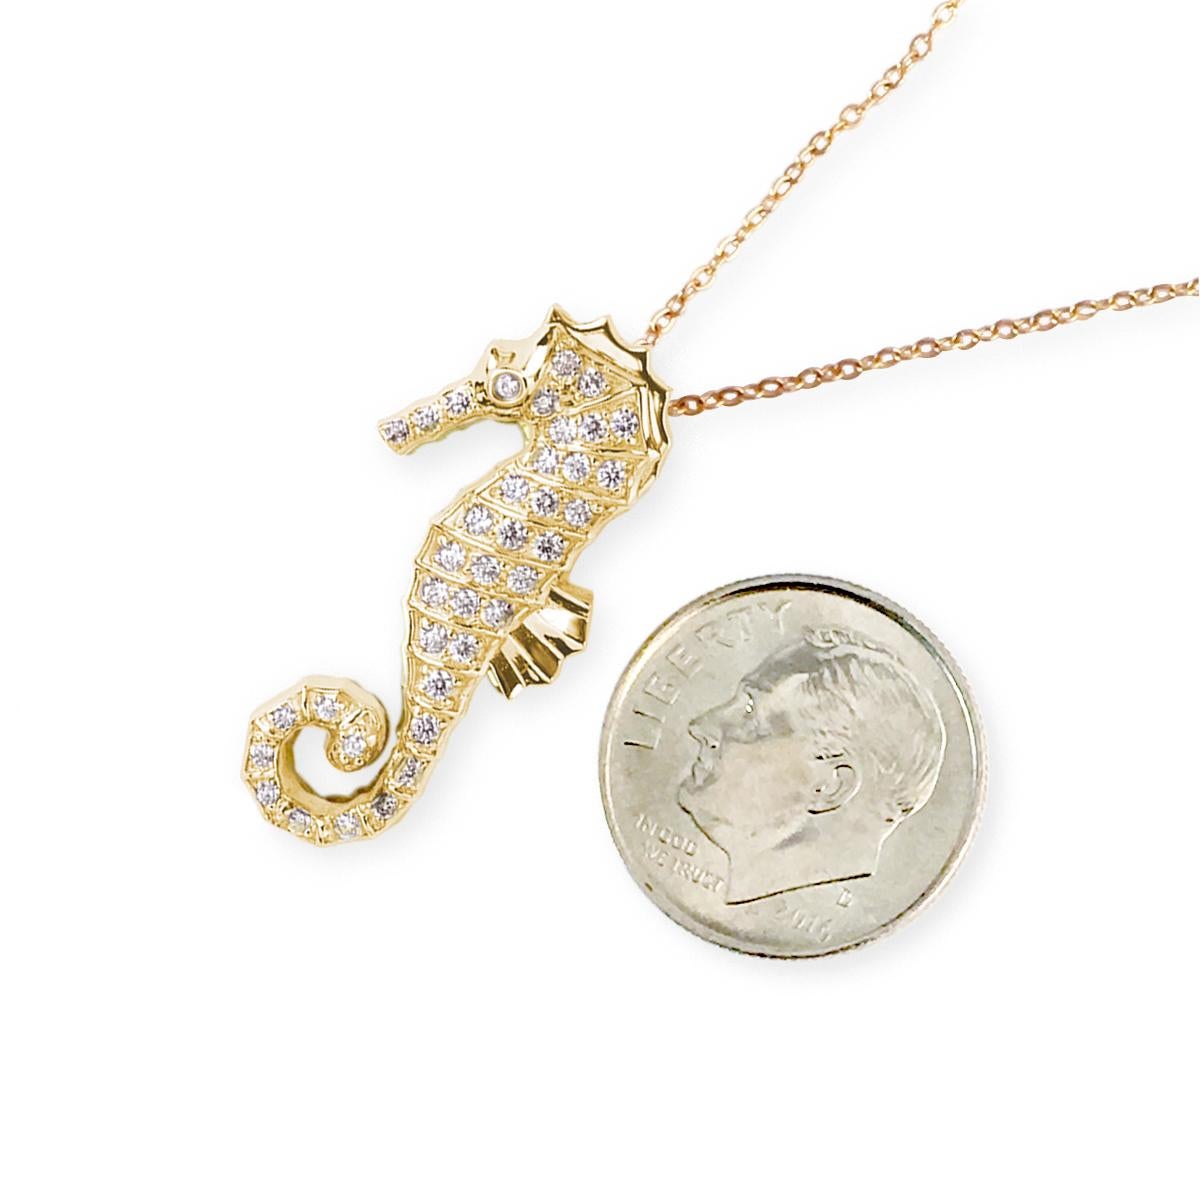 By Special Order only
Experience the enchantment of the sea with our Large Seahorse Diamond Pendant in Yellow Gold. Crafted with meticulous attention to detail, this limited edition piece features 39 brilliant-cut round diamonds intricately pave set